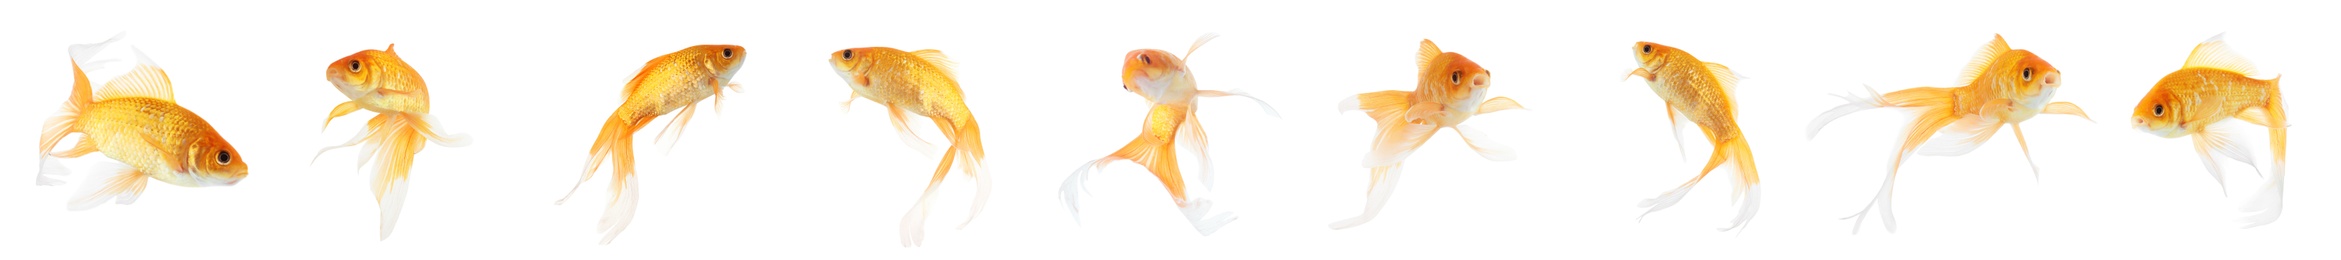 Beautiful bright small goldfish on white background, collage. Banner design